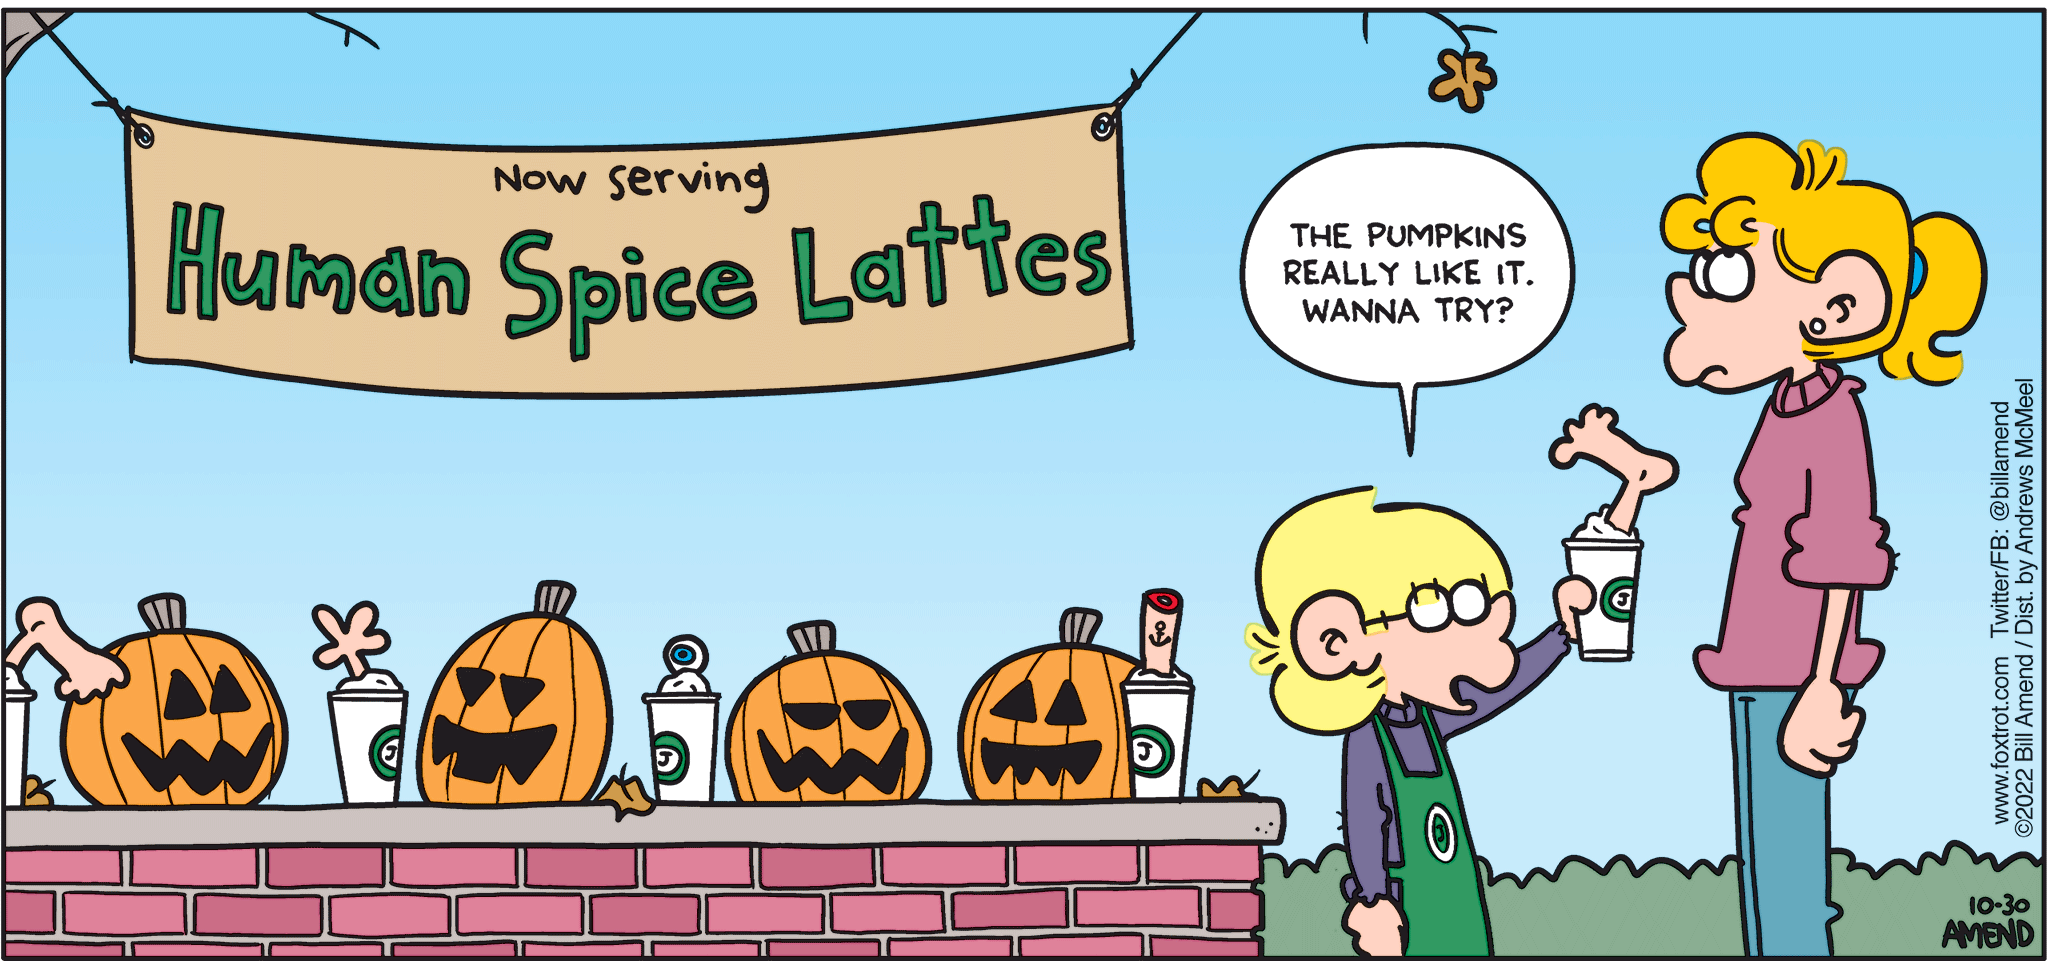 FoxTrot comic strip by Bill Amend - "Spicing Things Up" published October 30, 2022 - Transcript: Jason Fox: The pumpkins really like it. Wanna try?